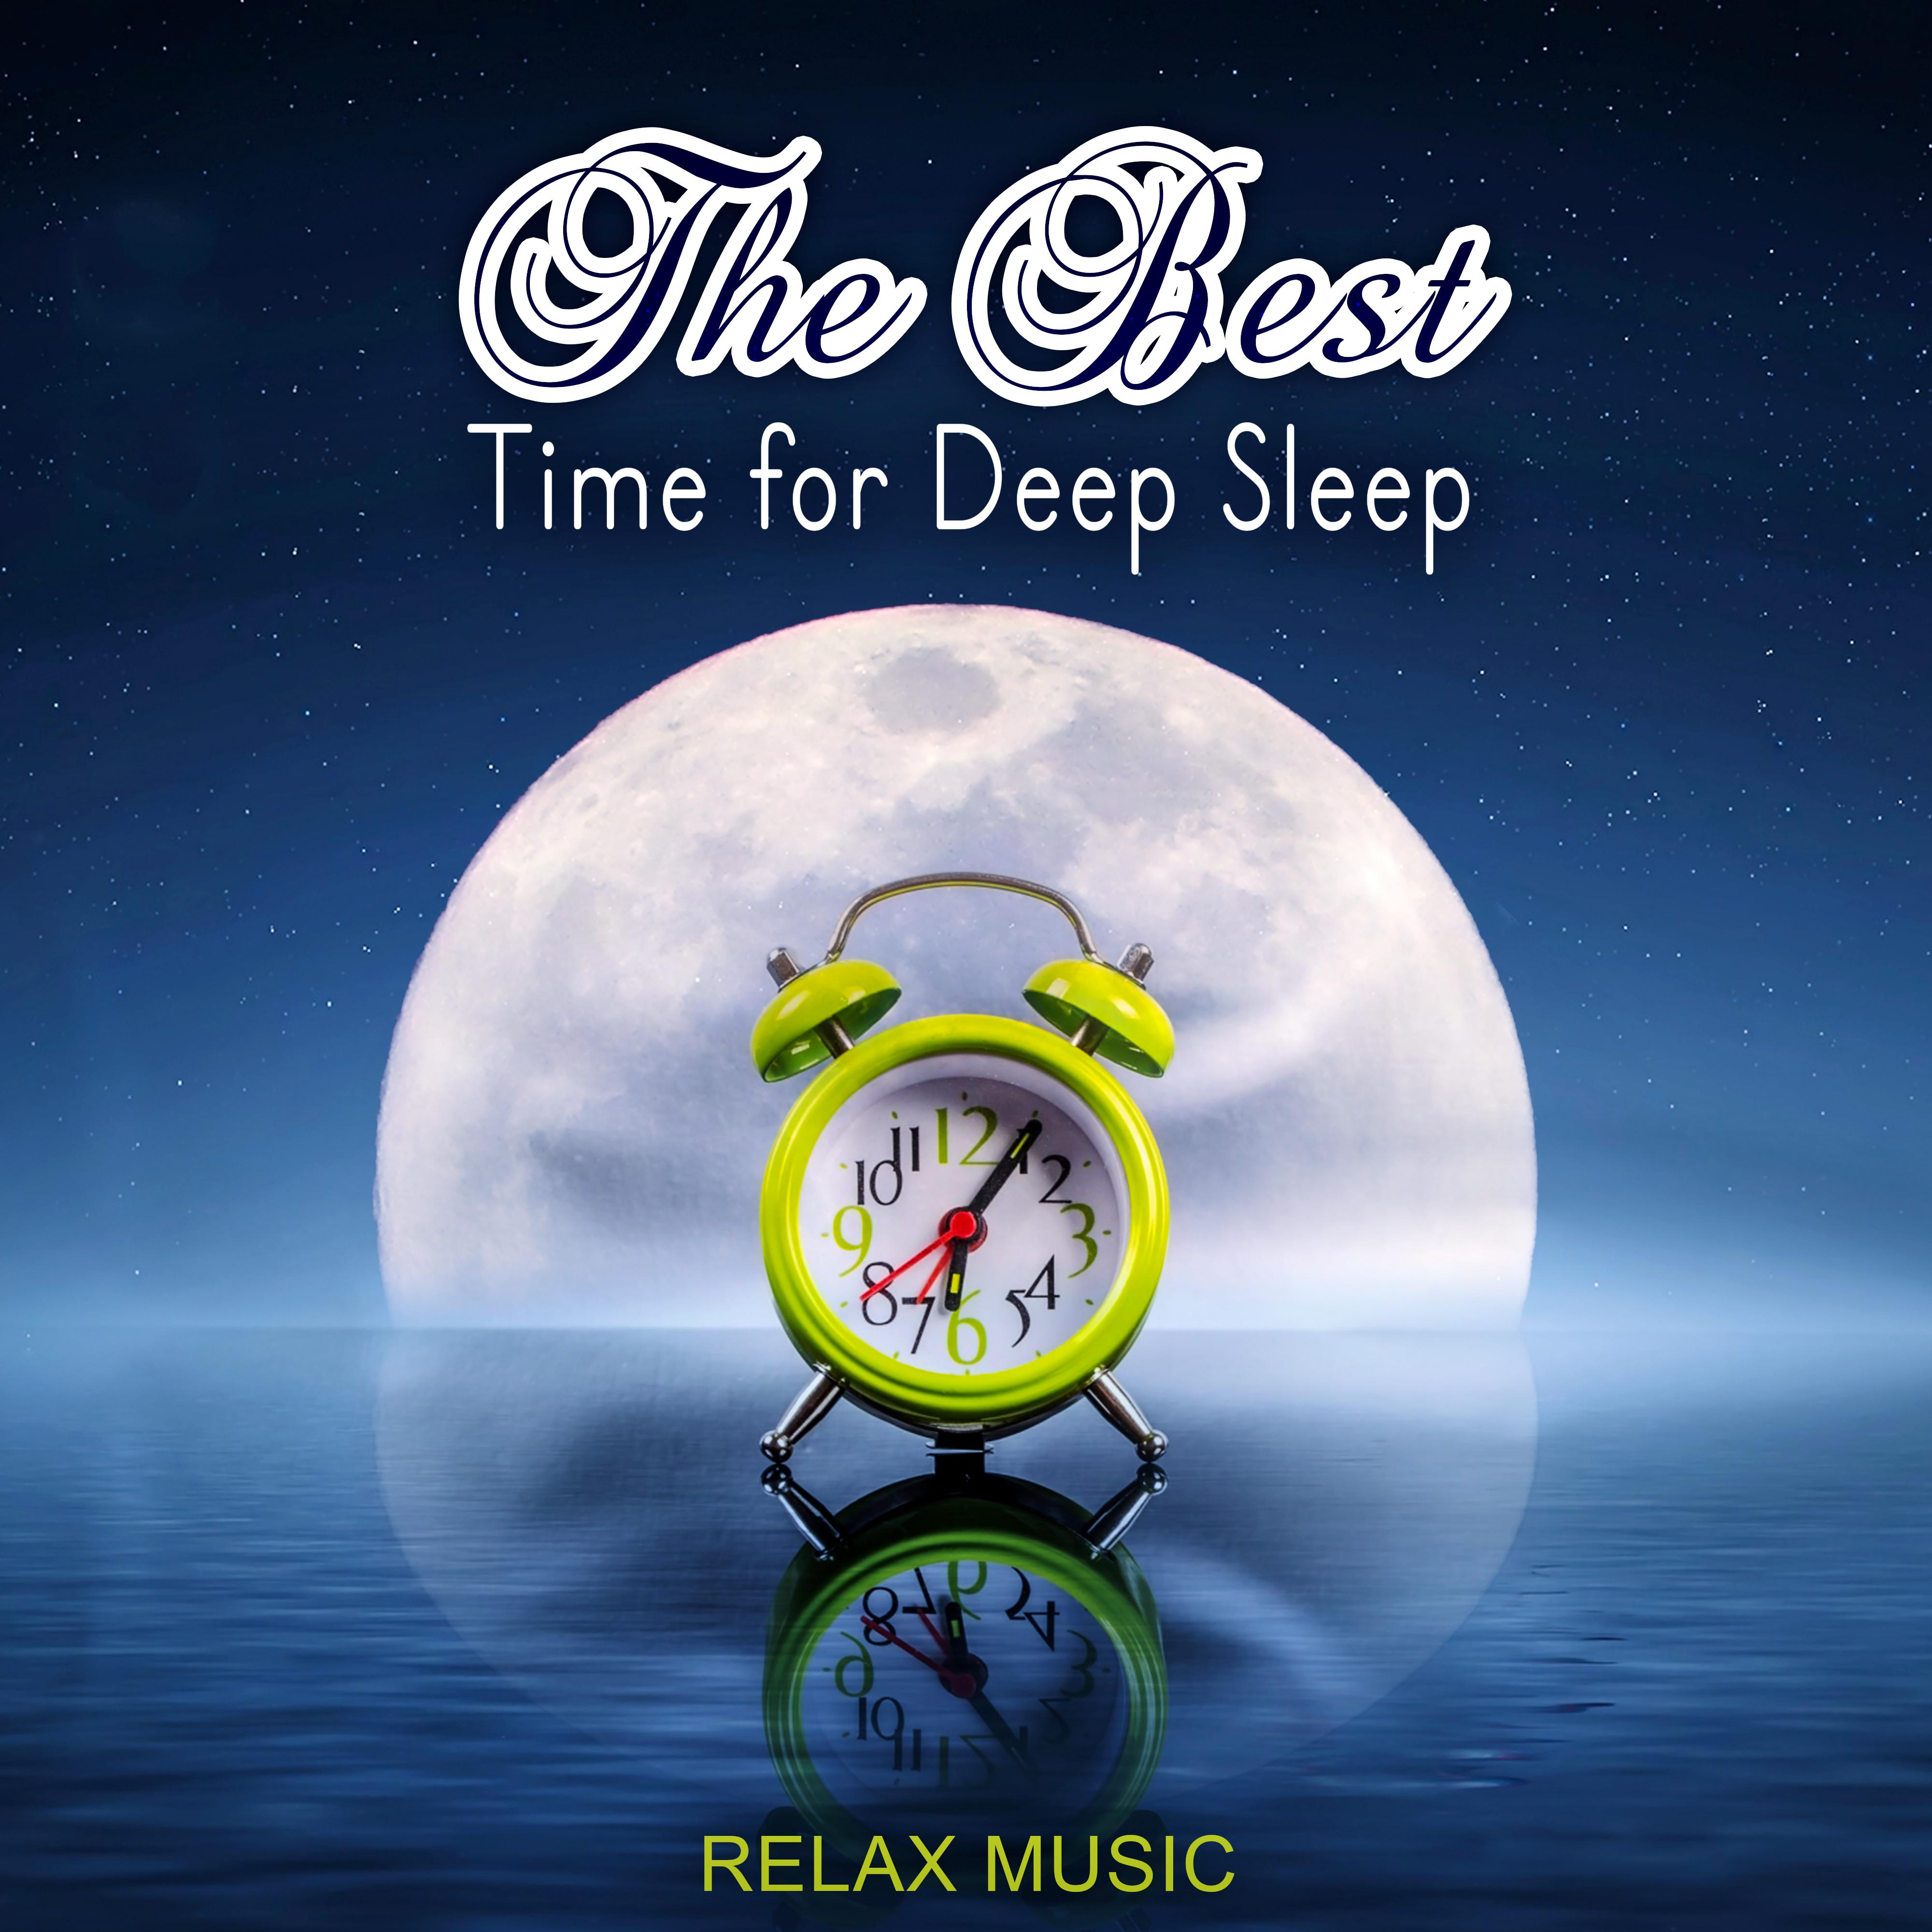 The Best Time for Deep Sleep with Relaxing Music